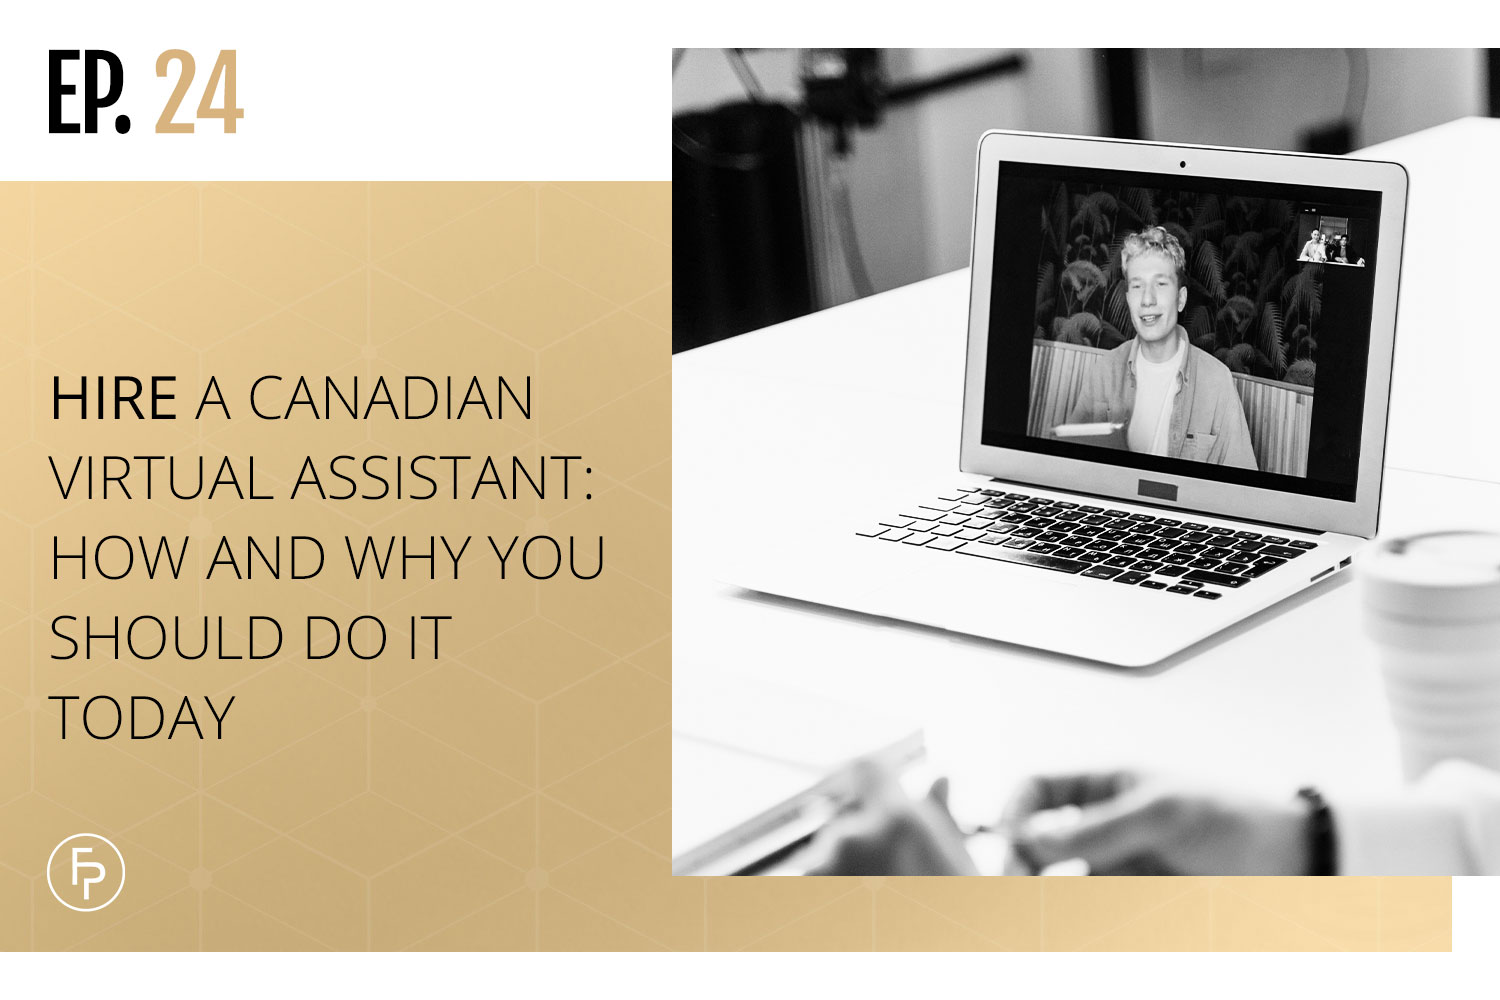 Hire a Canadian Virtual Assistant: How and Why You Should Do It Today | Ep 24